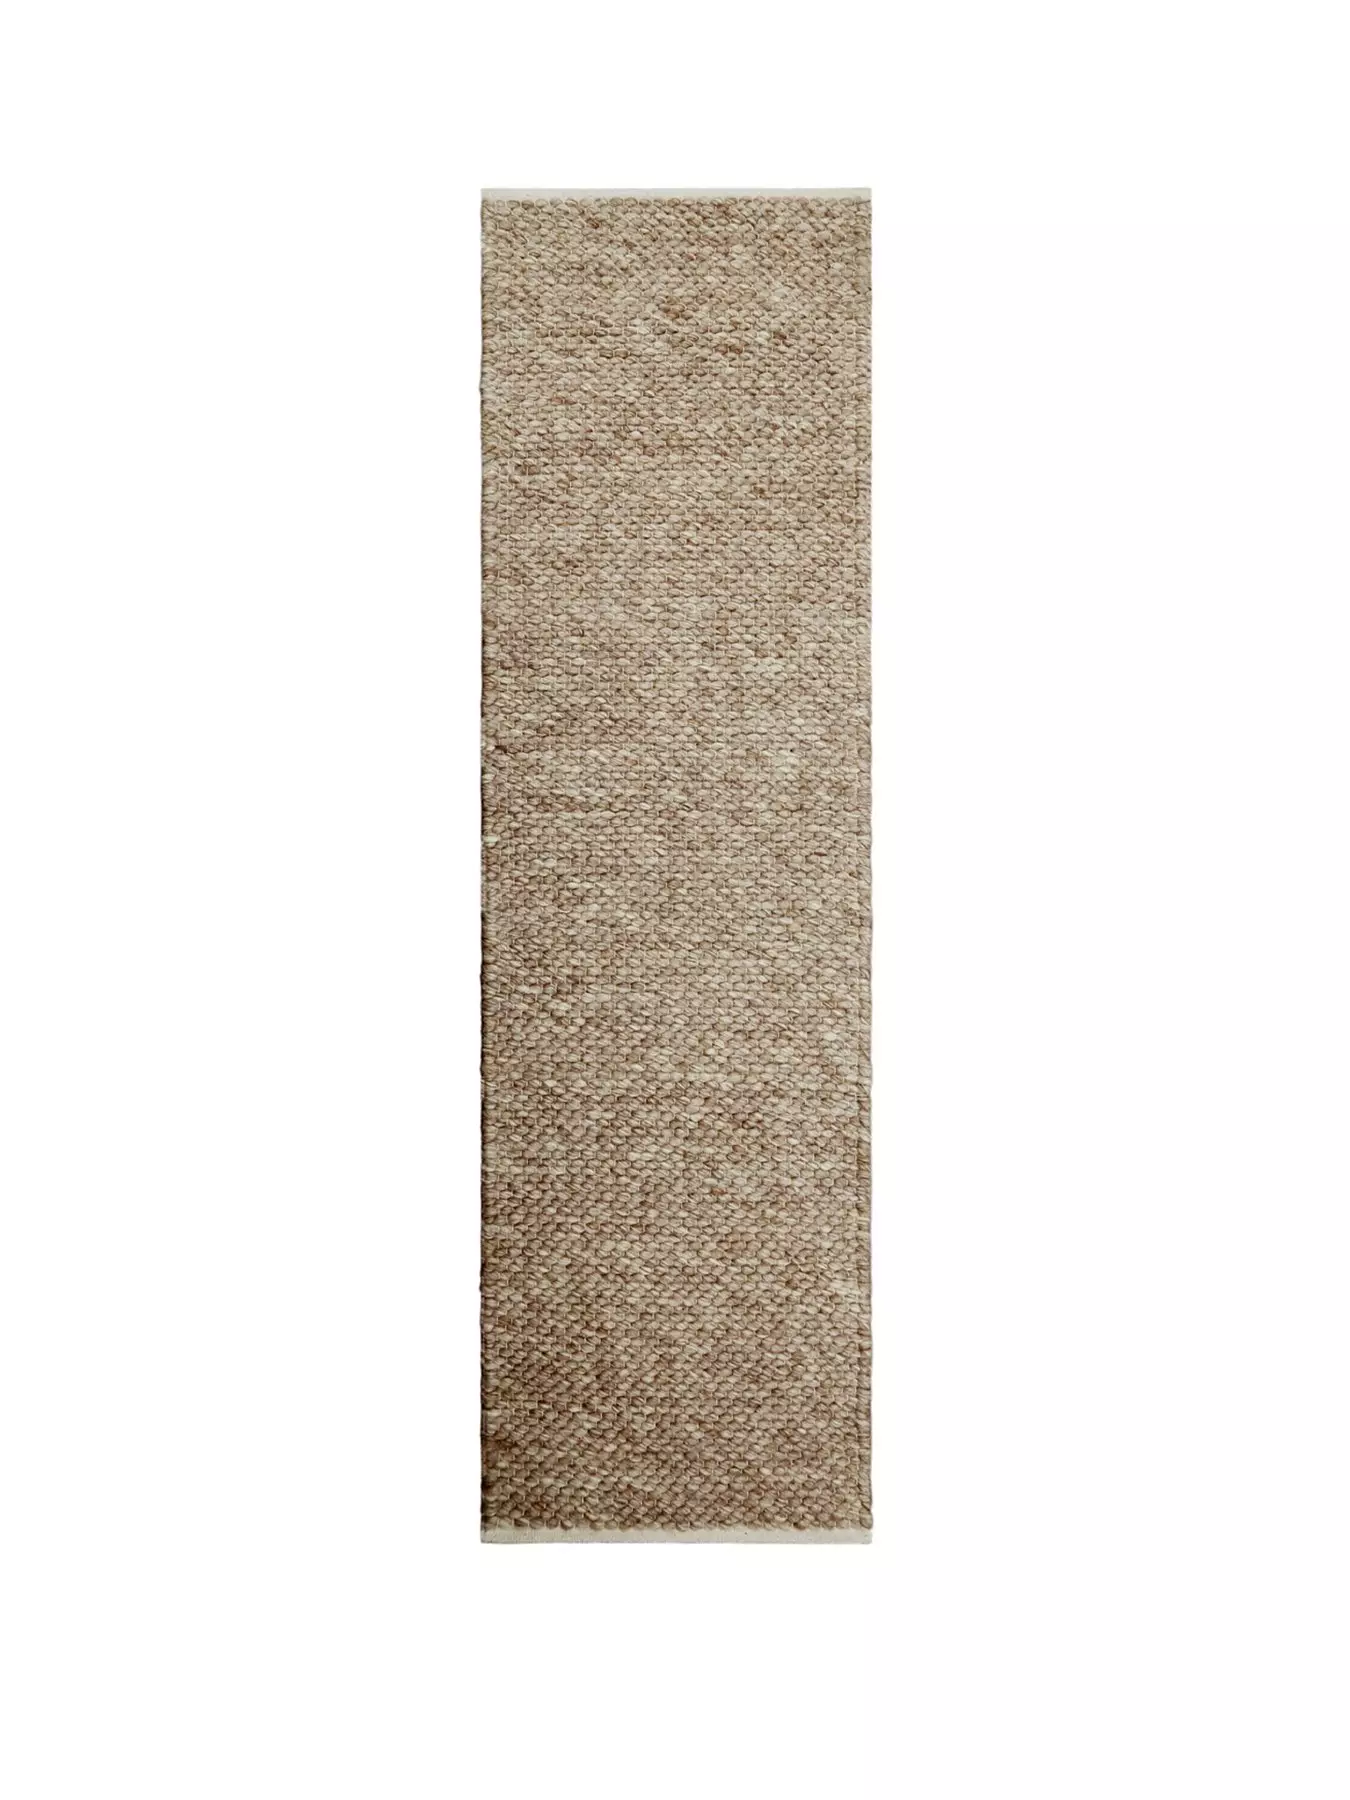 On Sale Prestwich Braided Jute Natural/Olive Green Round Rug Lowest Price  £99 At Rug Love